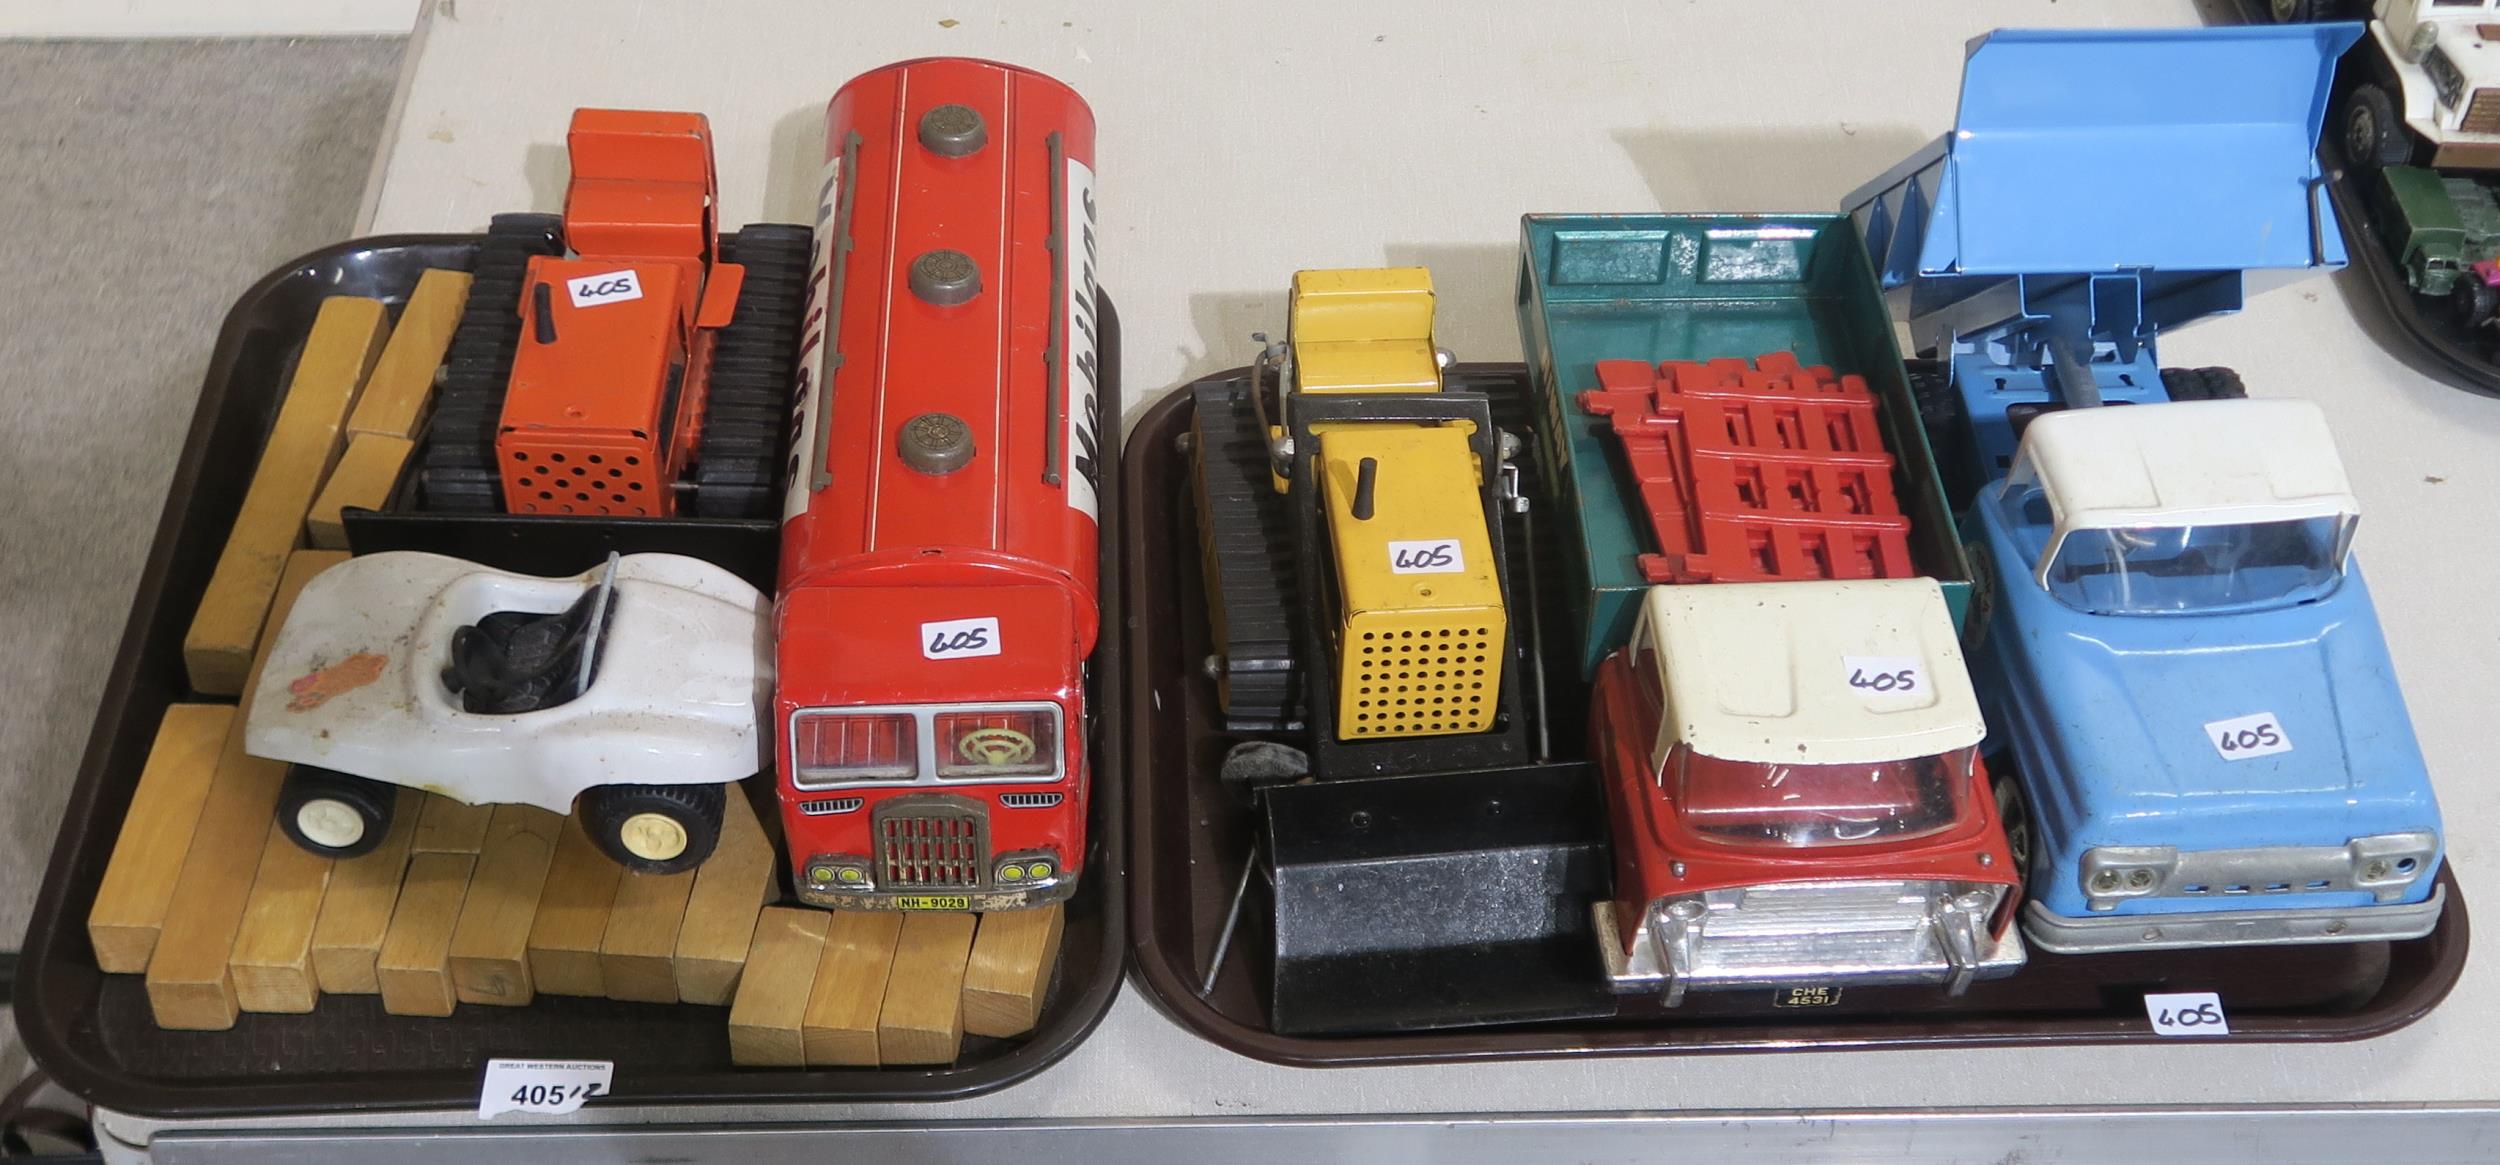 Tonka toy vehicles, comprising two bulldozers, a hydraulic dumper truck and a flatbed truck,